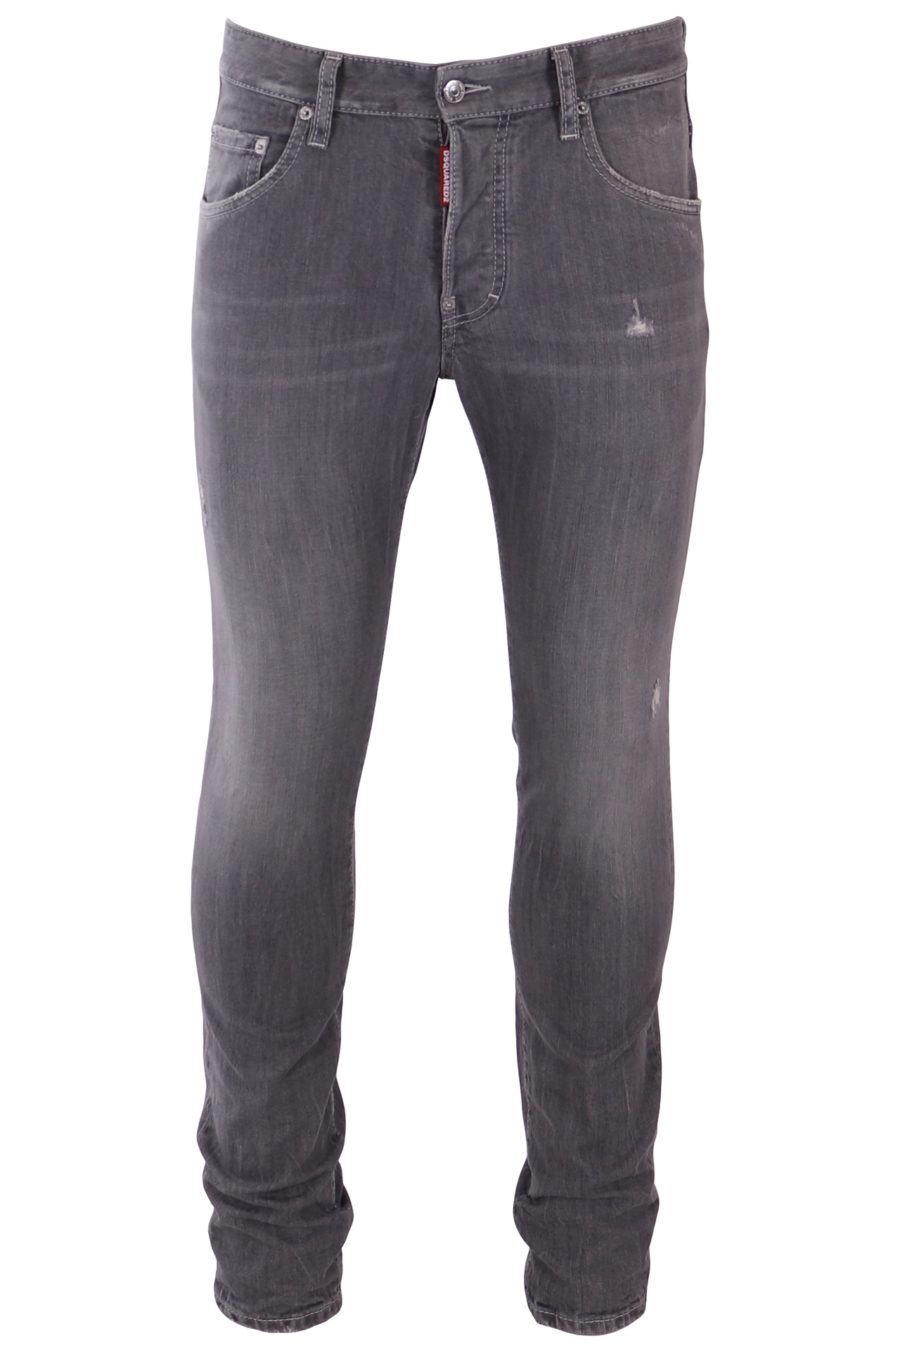 Jeans Dsquared2 Skater Jean Cinzento - dae10bed8bcd18e4a1d6e3a2583b3bc58d0b2ad8